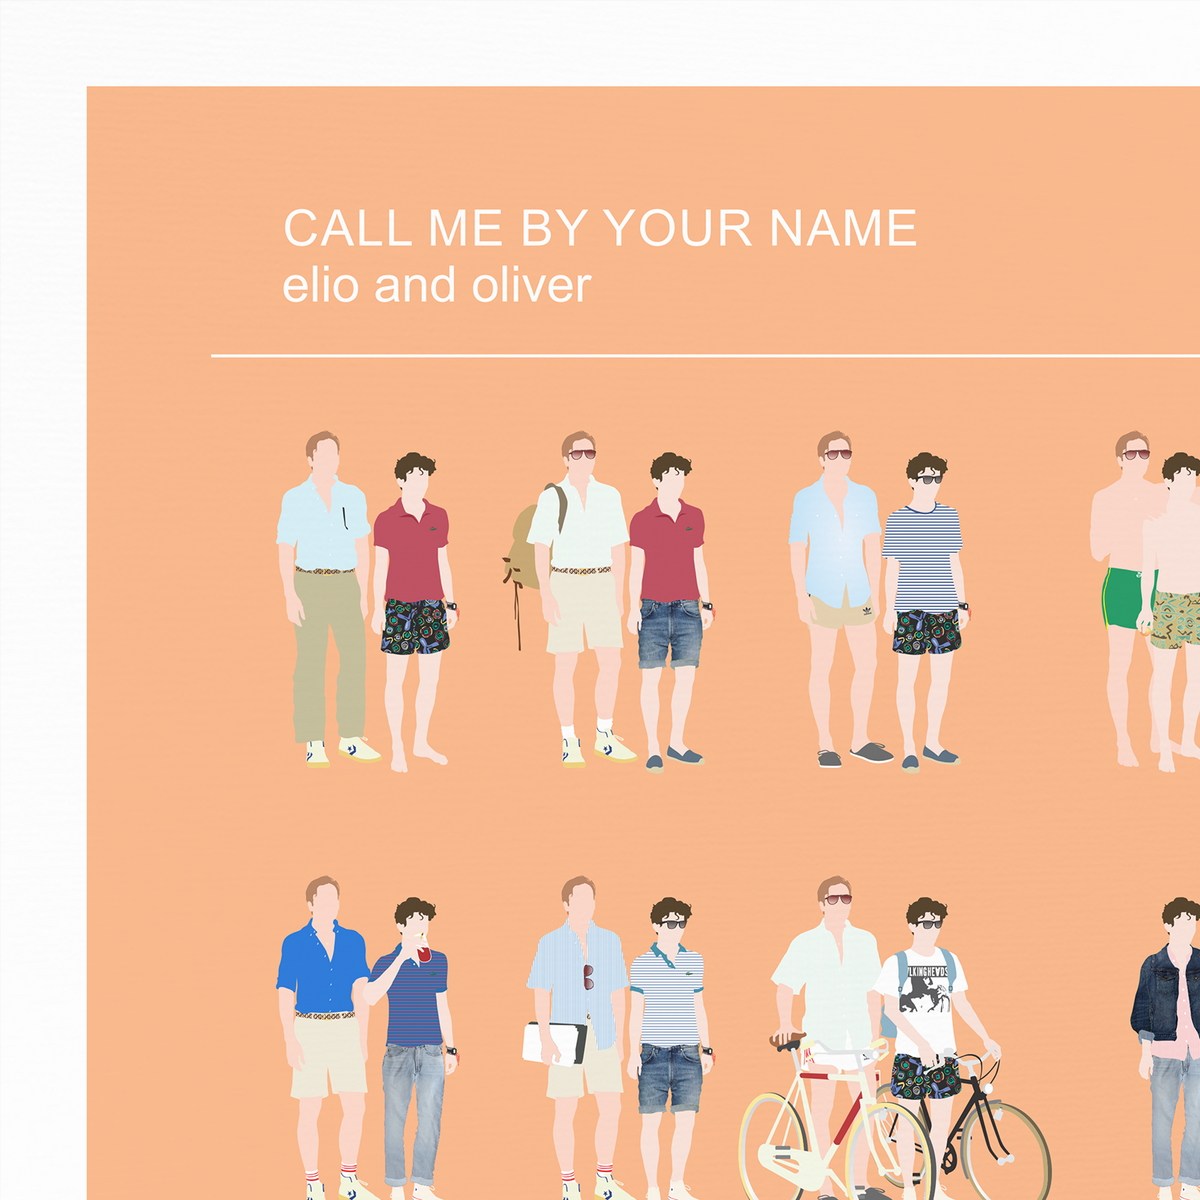 Timothée Chalamet Art Print (Call Me By Your Name) Poster for